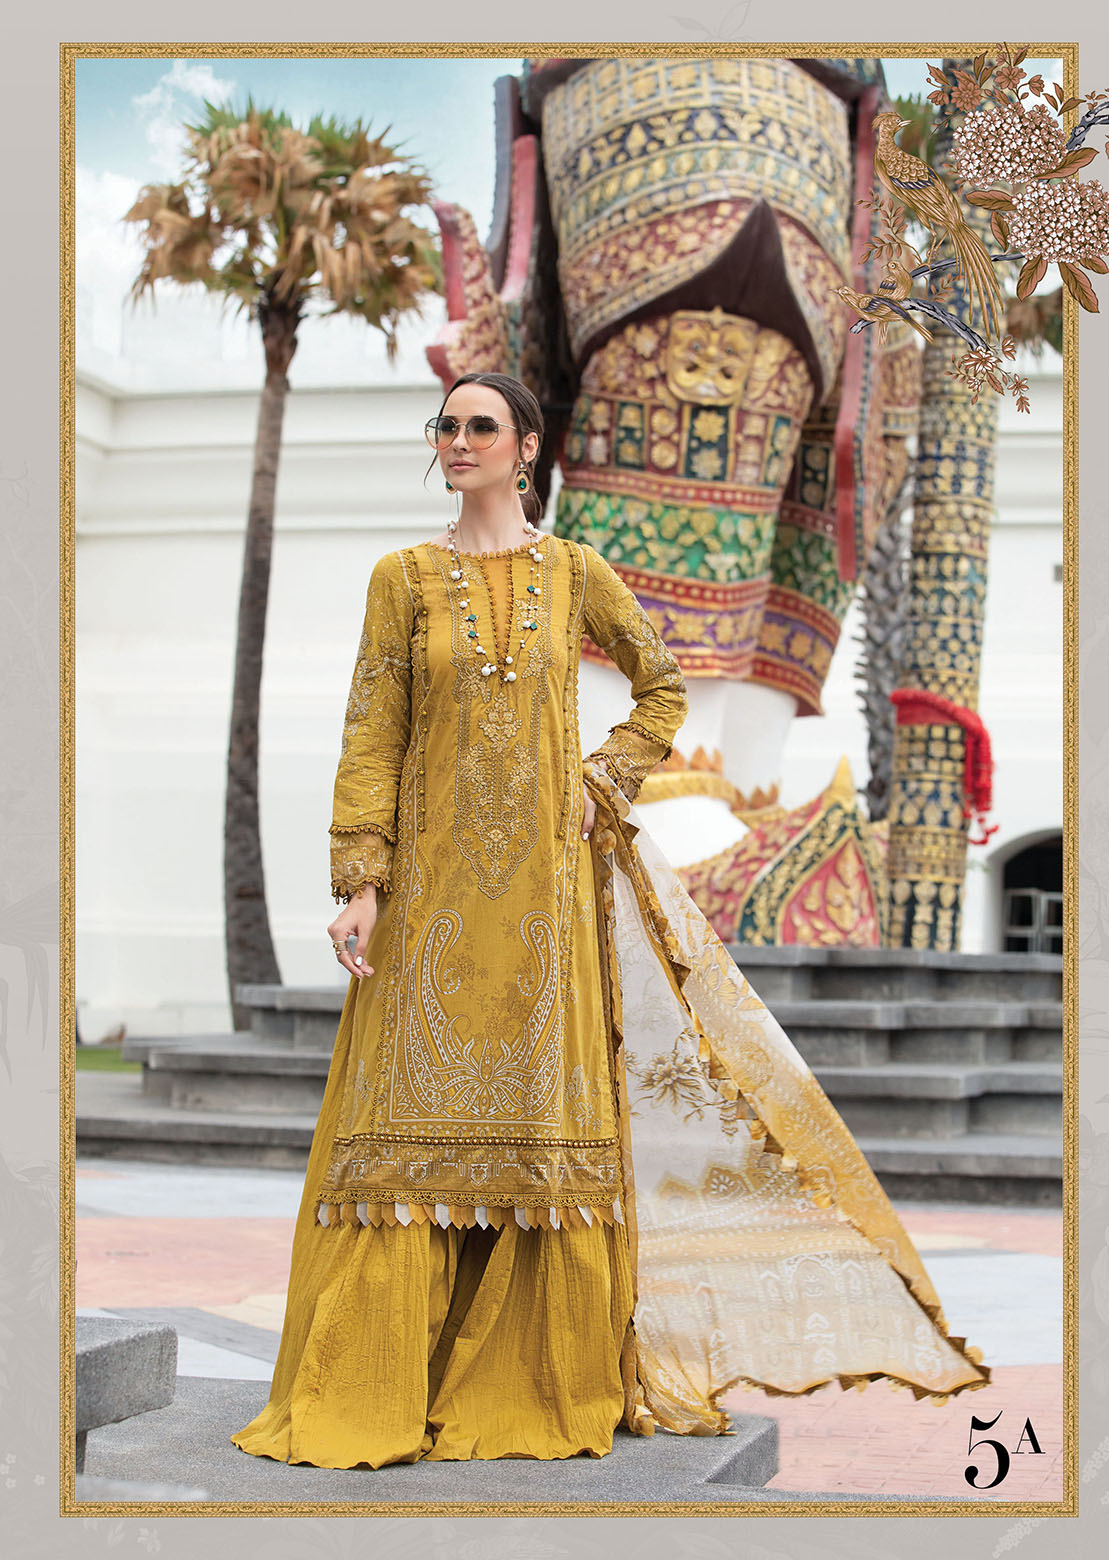 Buy Now, 5A - M Prints - Eid Edit 2023 - Maria. B in UK - Shahana Collection UK - Wedding and Bridal Party Dresses